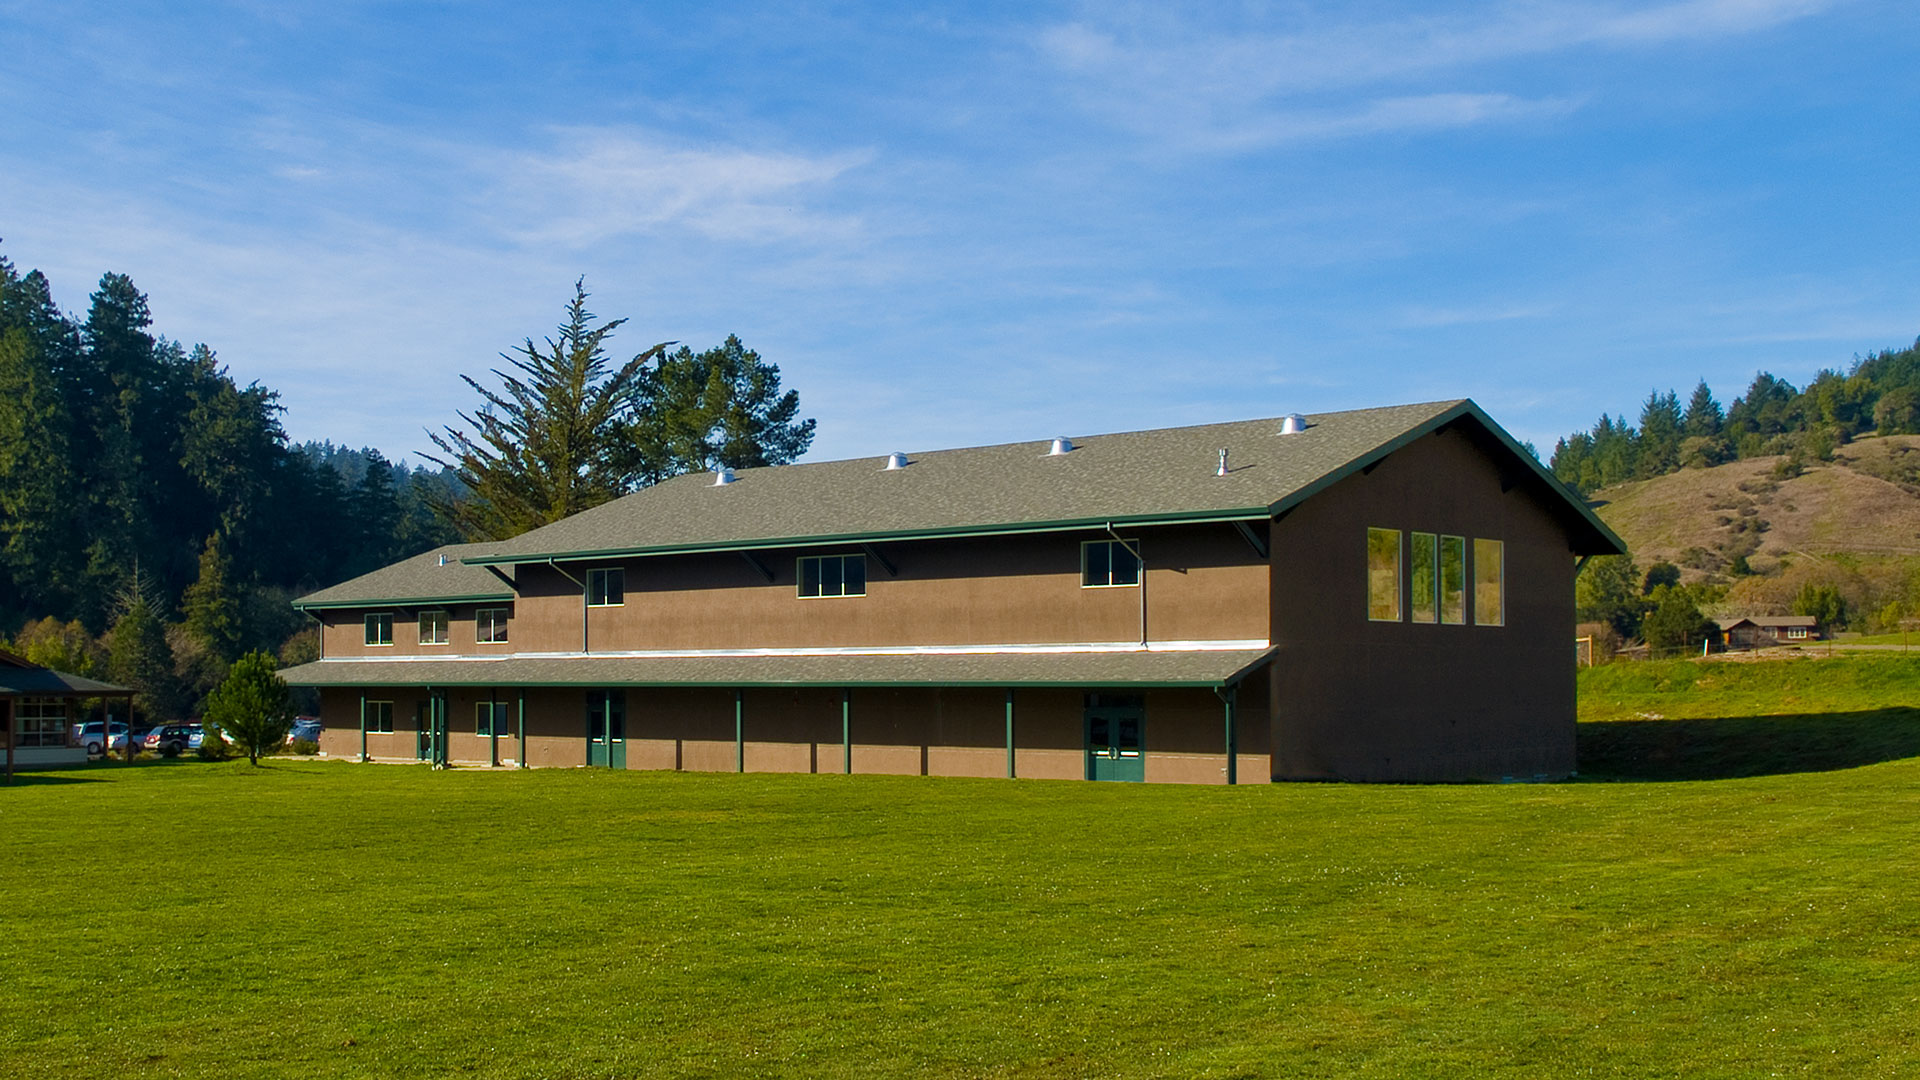 Gym building exterior with brown walls and green trim, barn-like design fits in with rural setting.